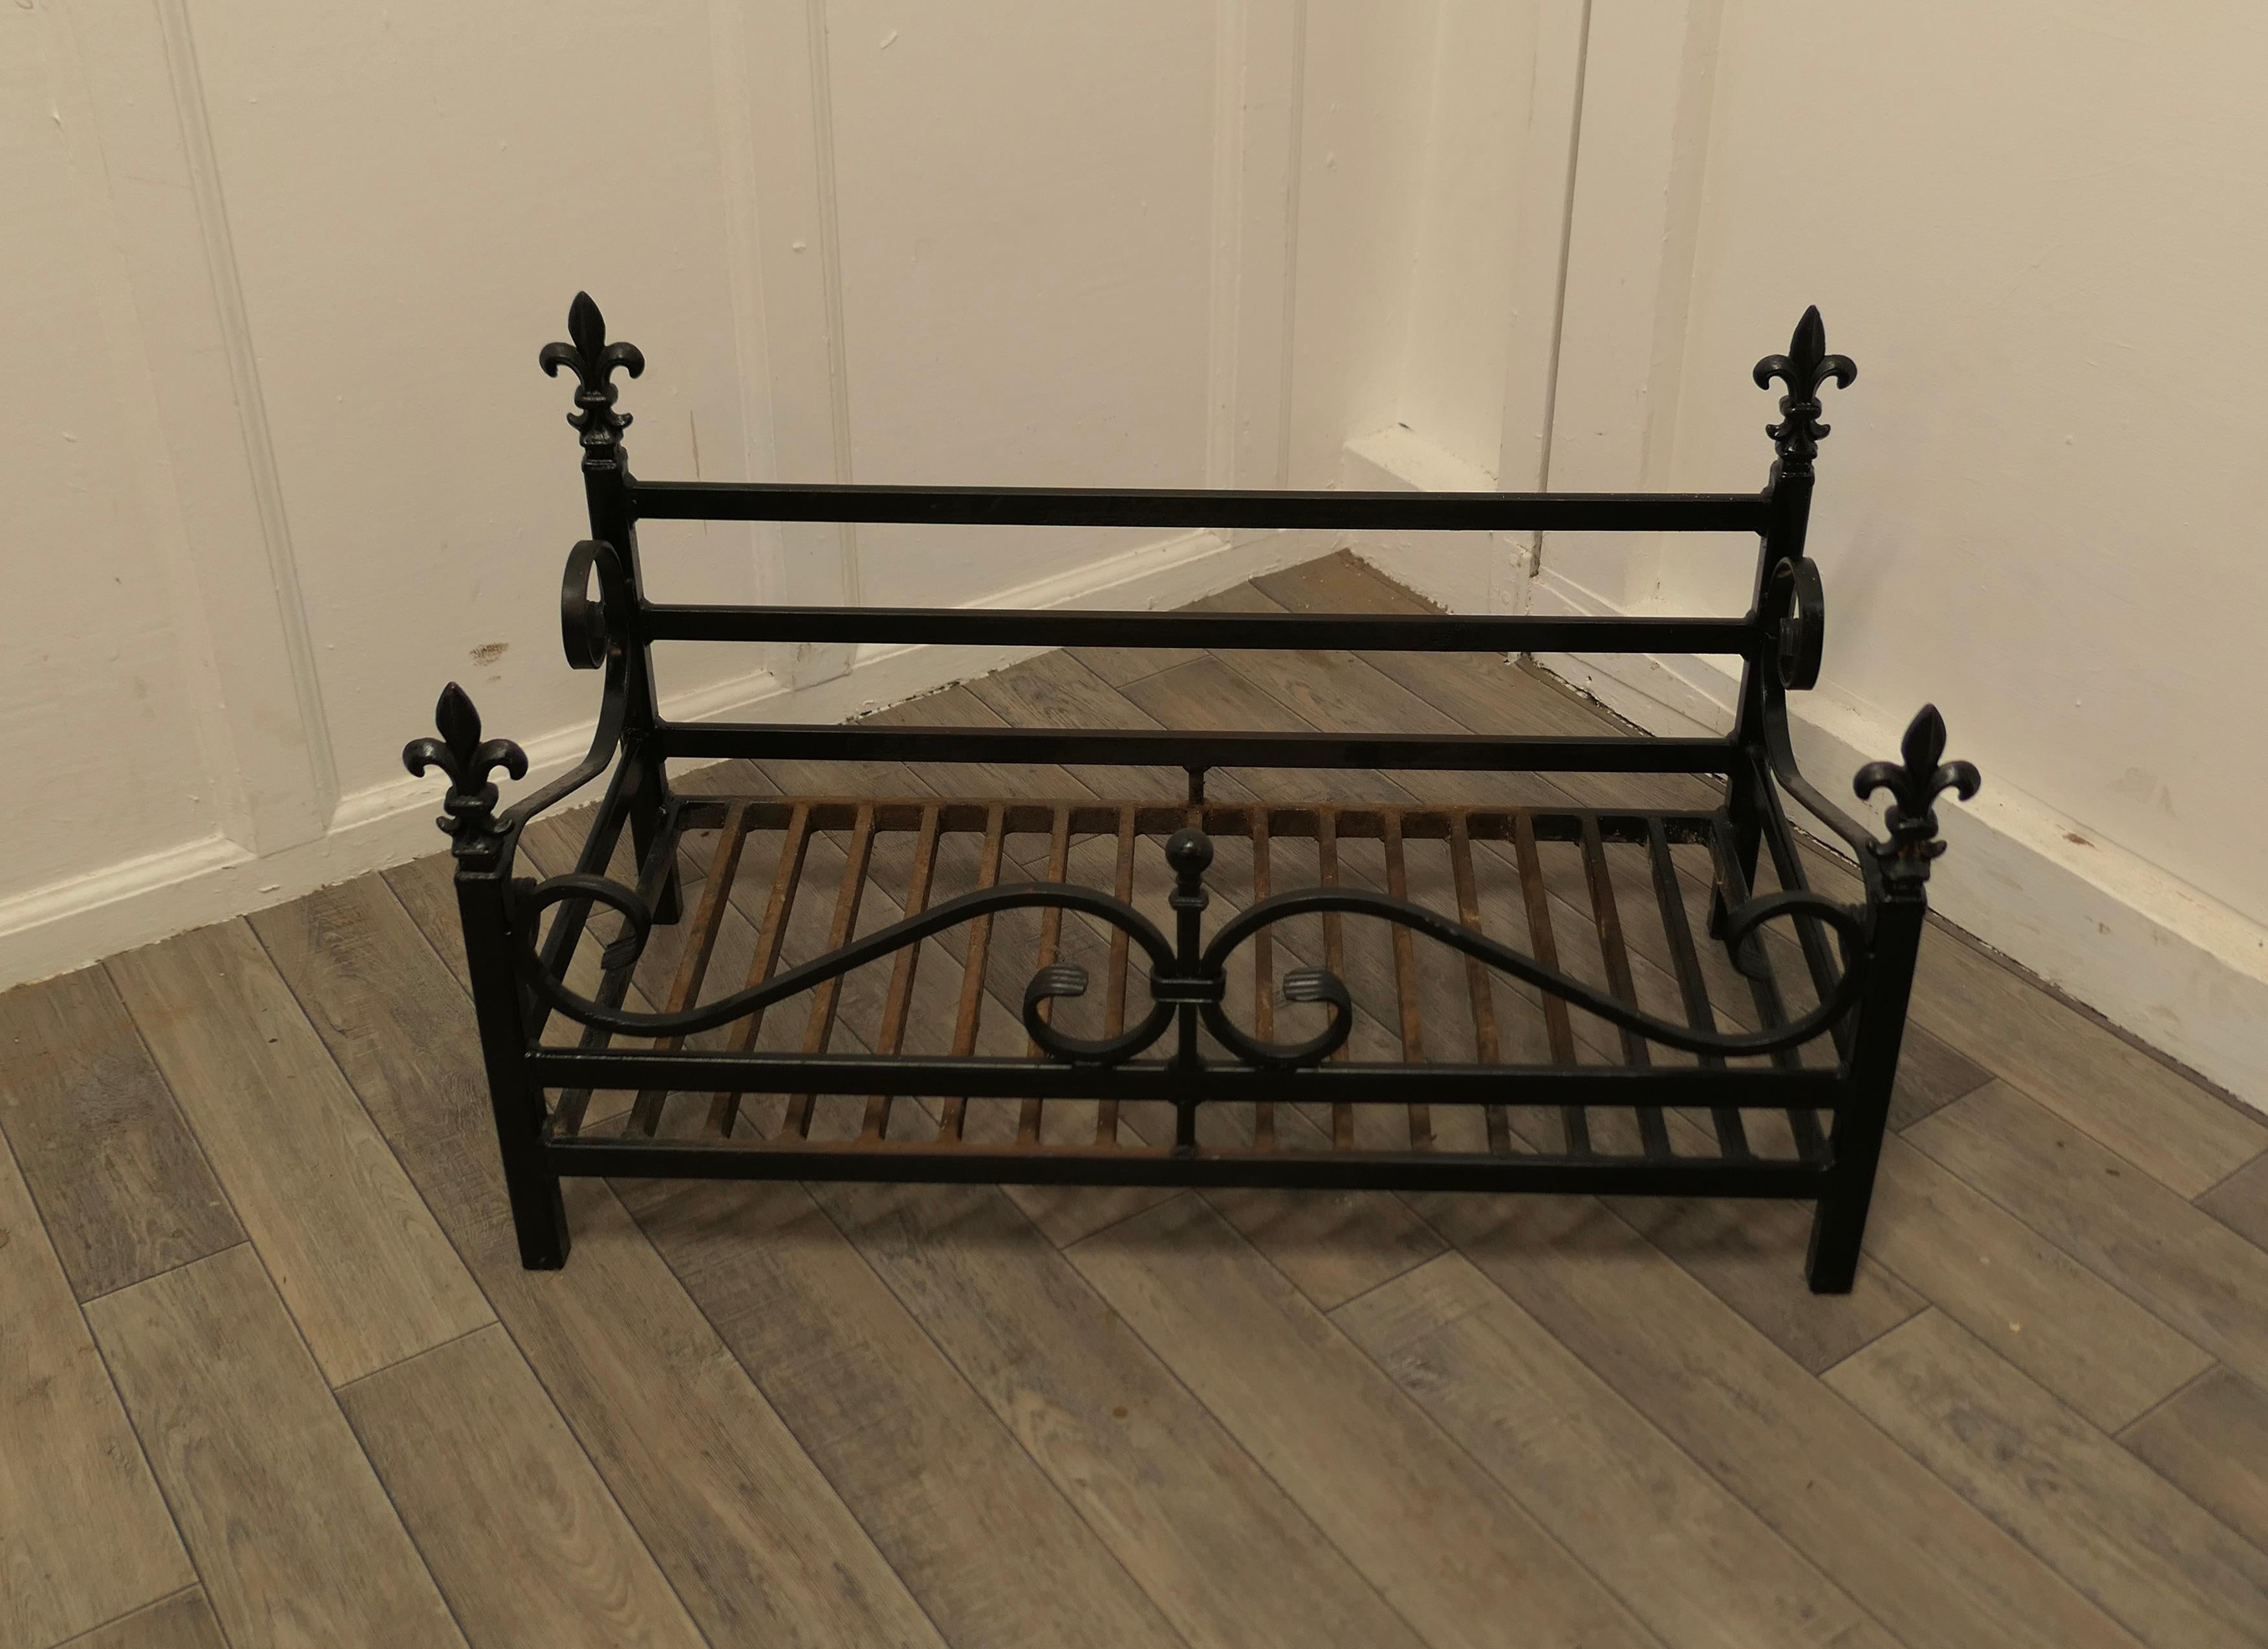 Large inglenook free standing fire basket, iron fire grate.

The grate has high cast and wrought iron rails all around with fleur des lys finials at the front and back corners.
The grate is in good used condition.
The grate is 333” long 15” deep